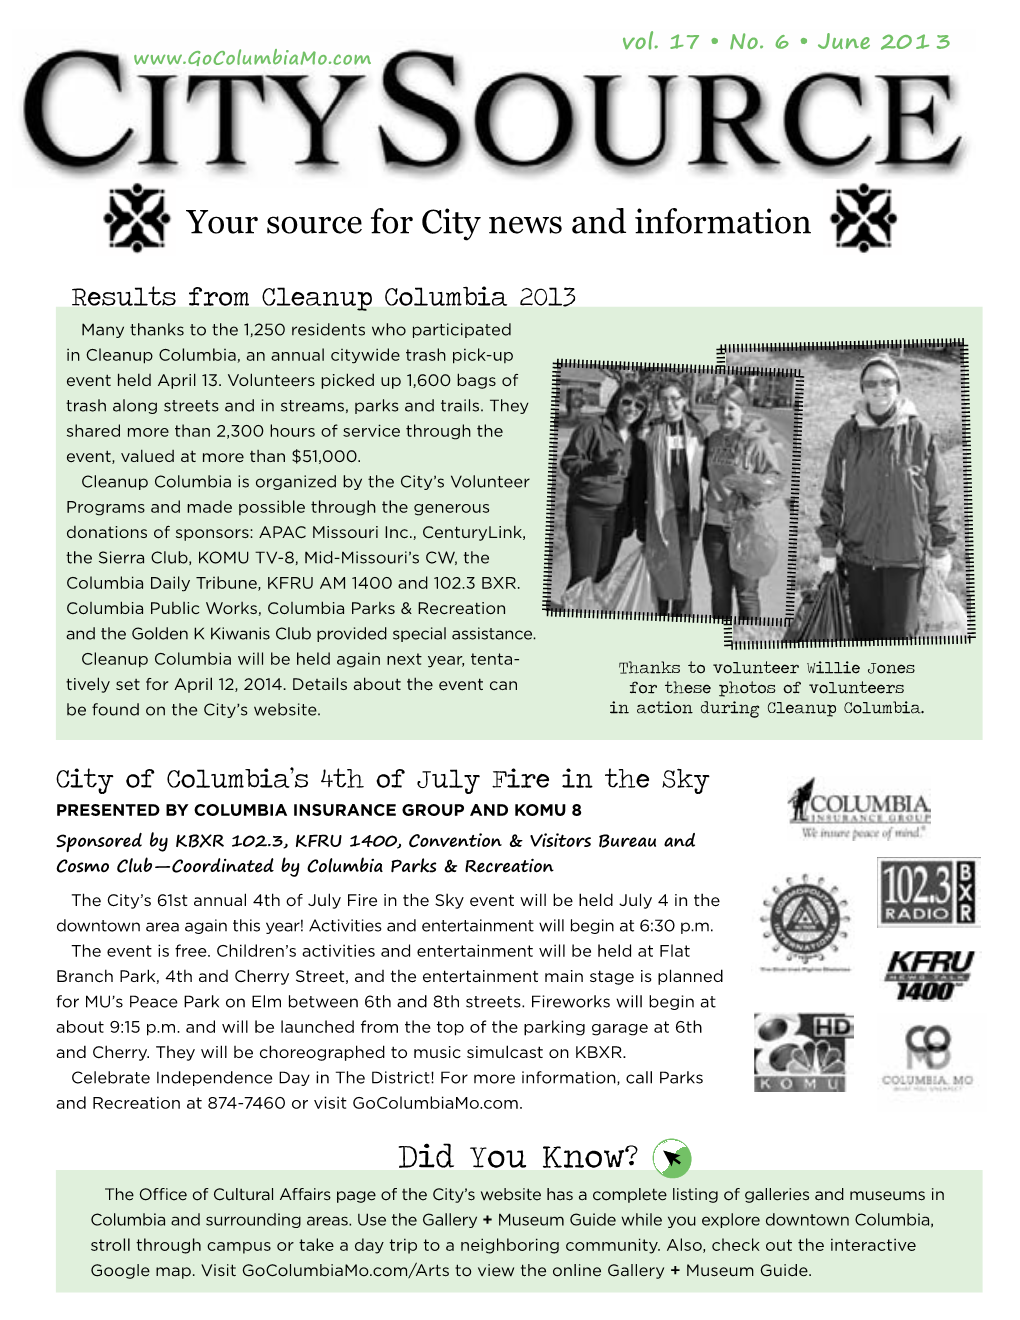 Your Source for City News and Information Did You Know?